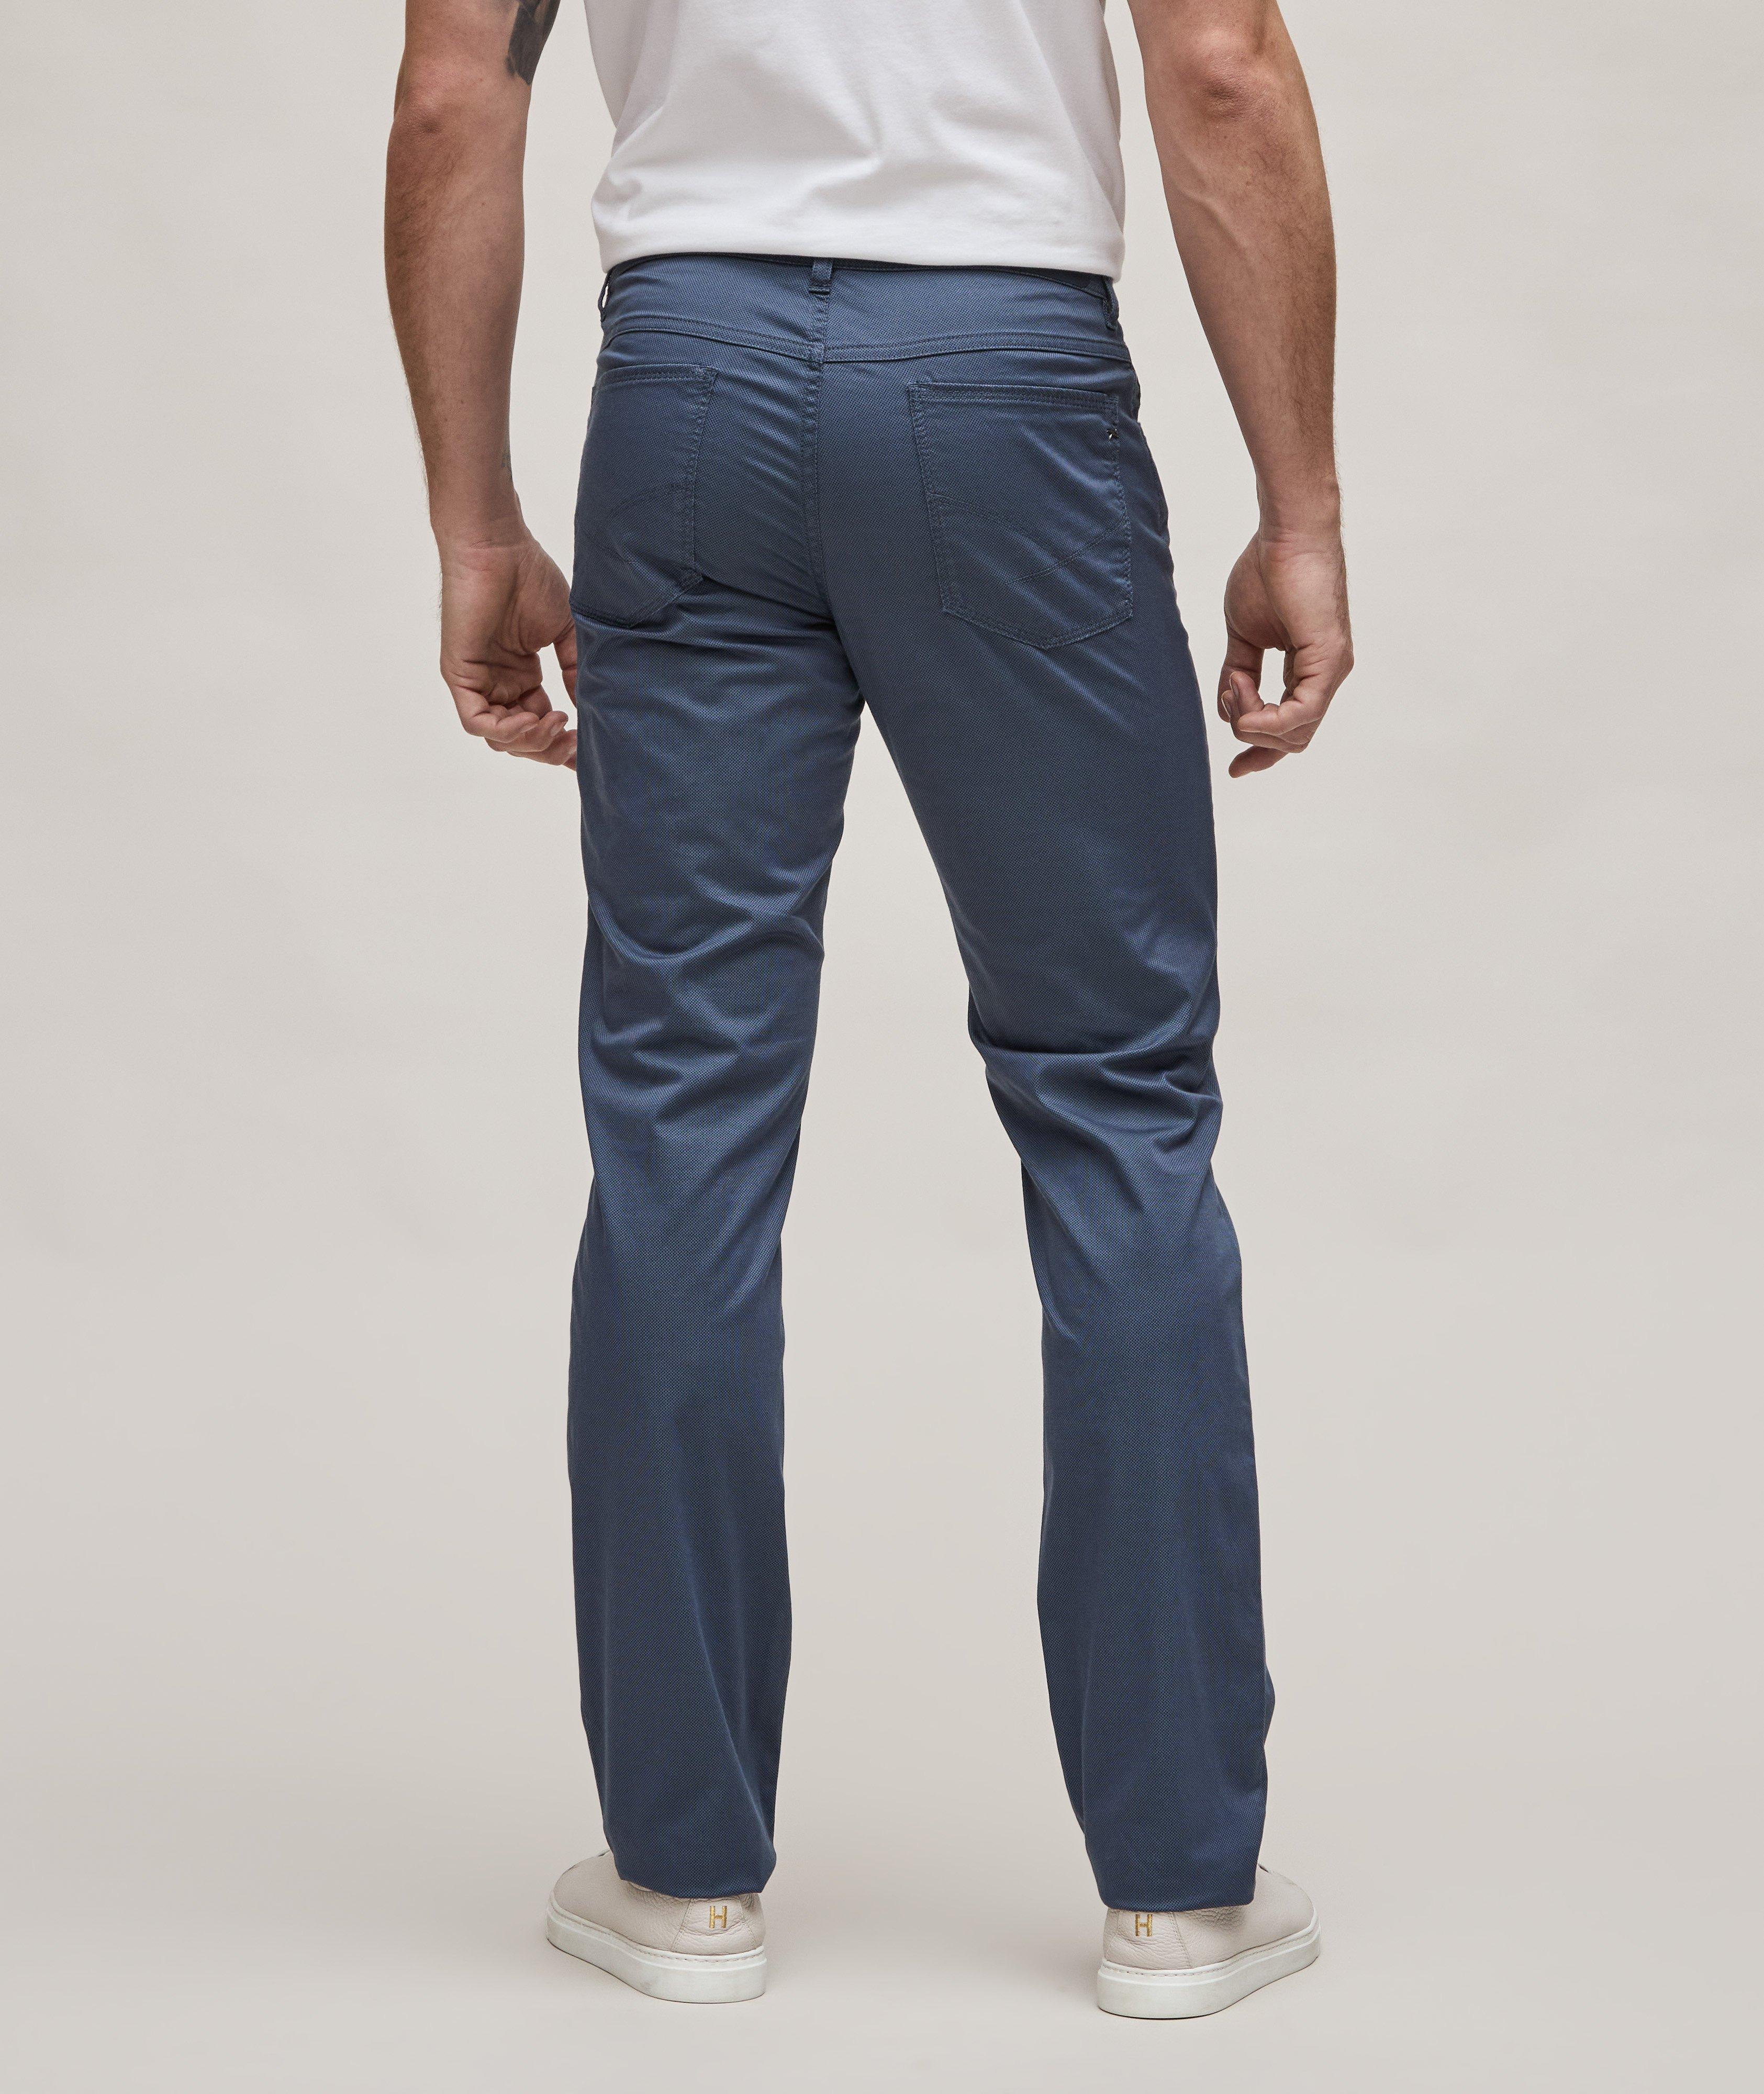 Cooper Ultralight Neat Sustainable Stretch-Cotton Pants  image 3